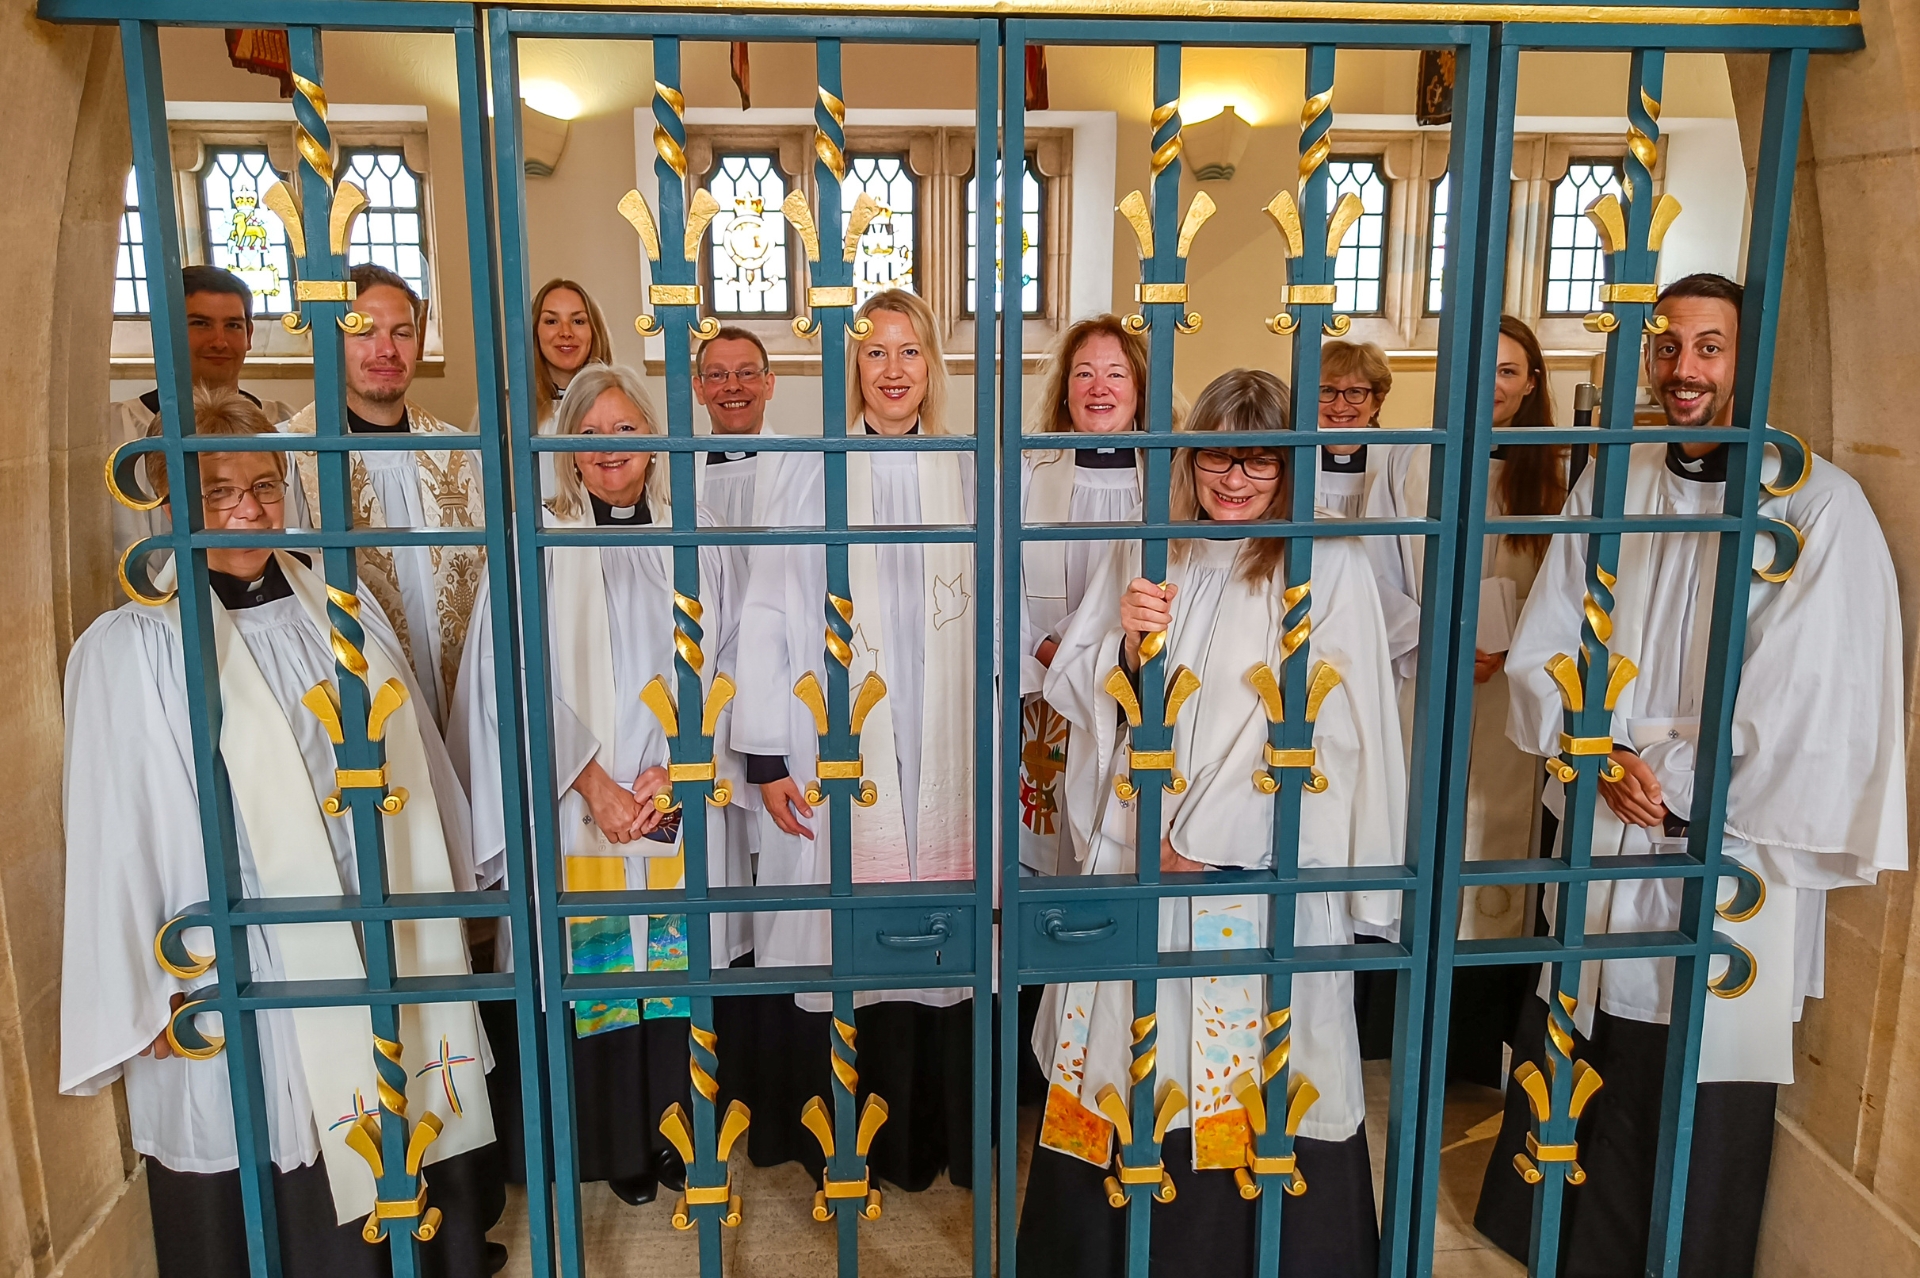 14 new priests behind some ornate bars in Guildford Cathedral in their robes and smiling